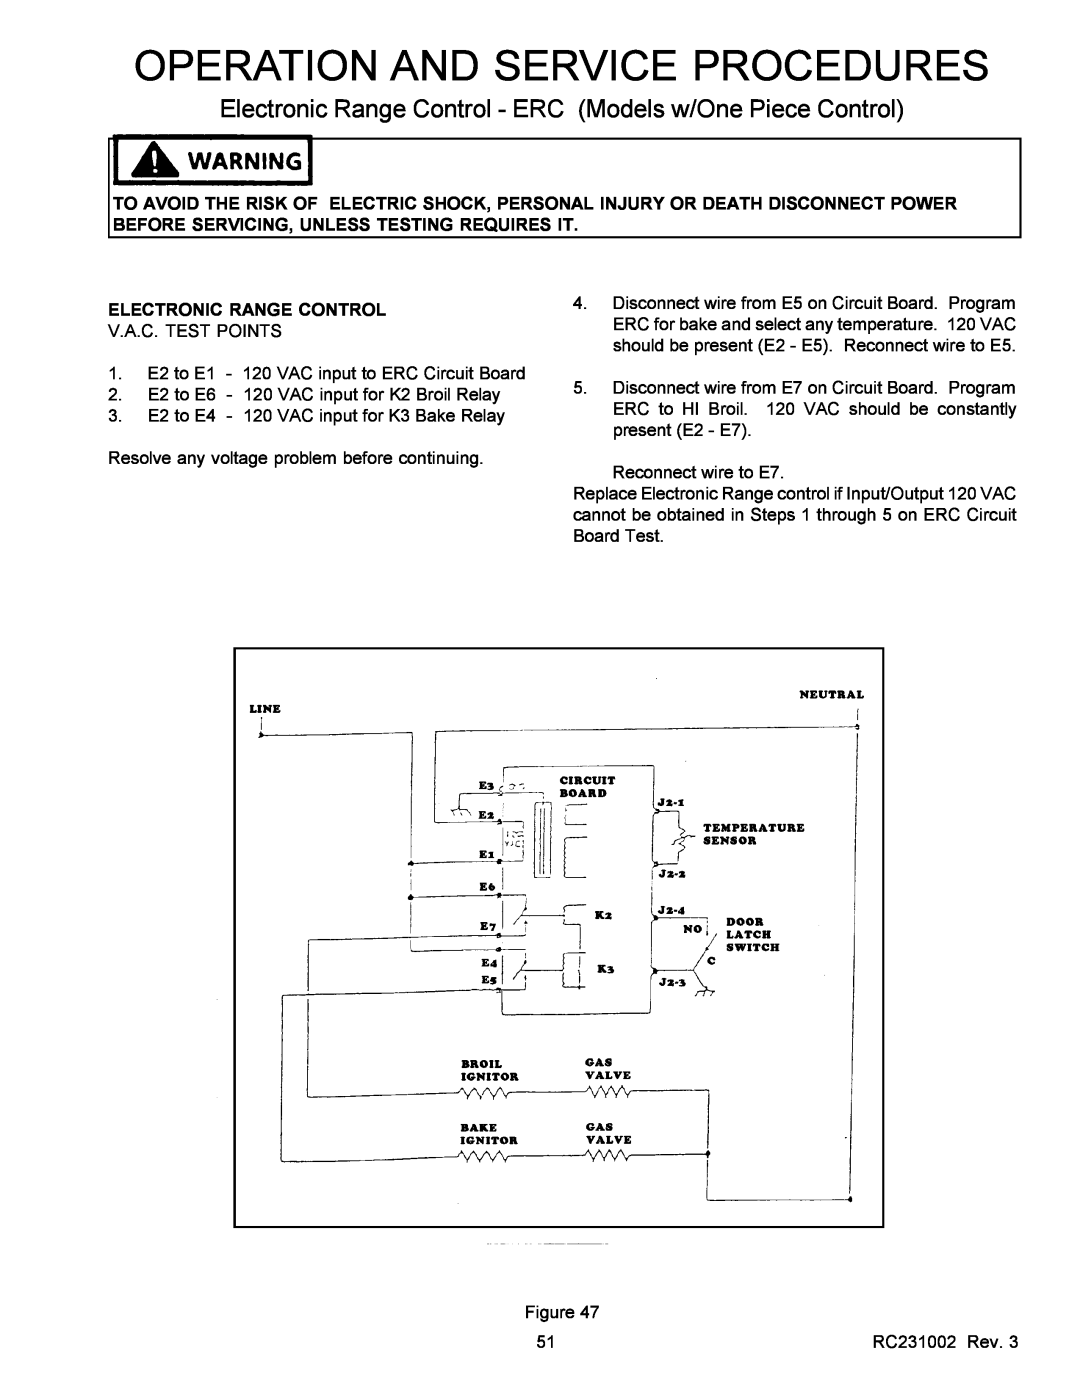 Amana RSS, RST service manual Electronic Range Control, Operation And Service Procedures 